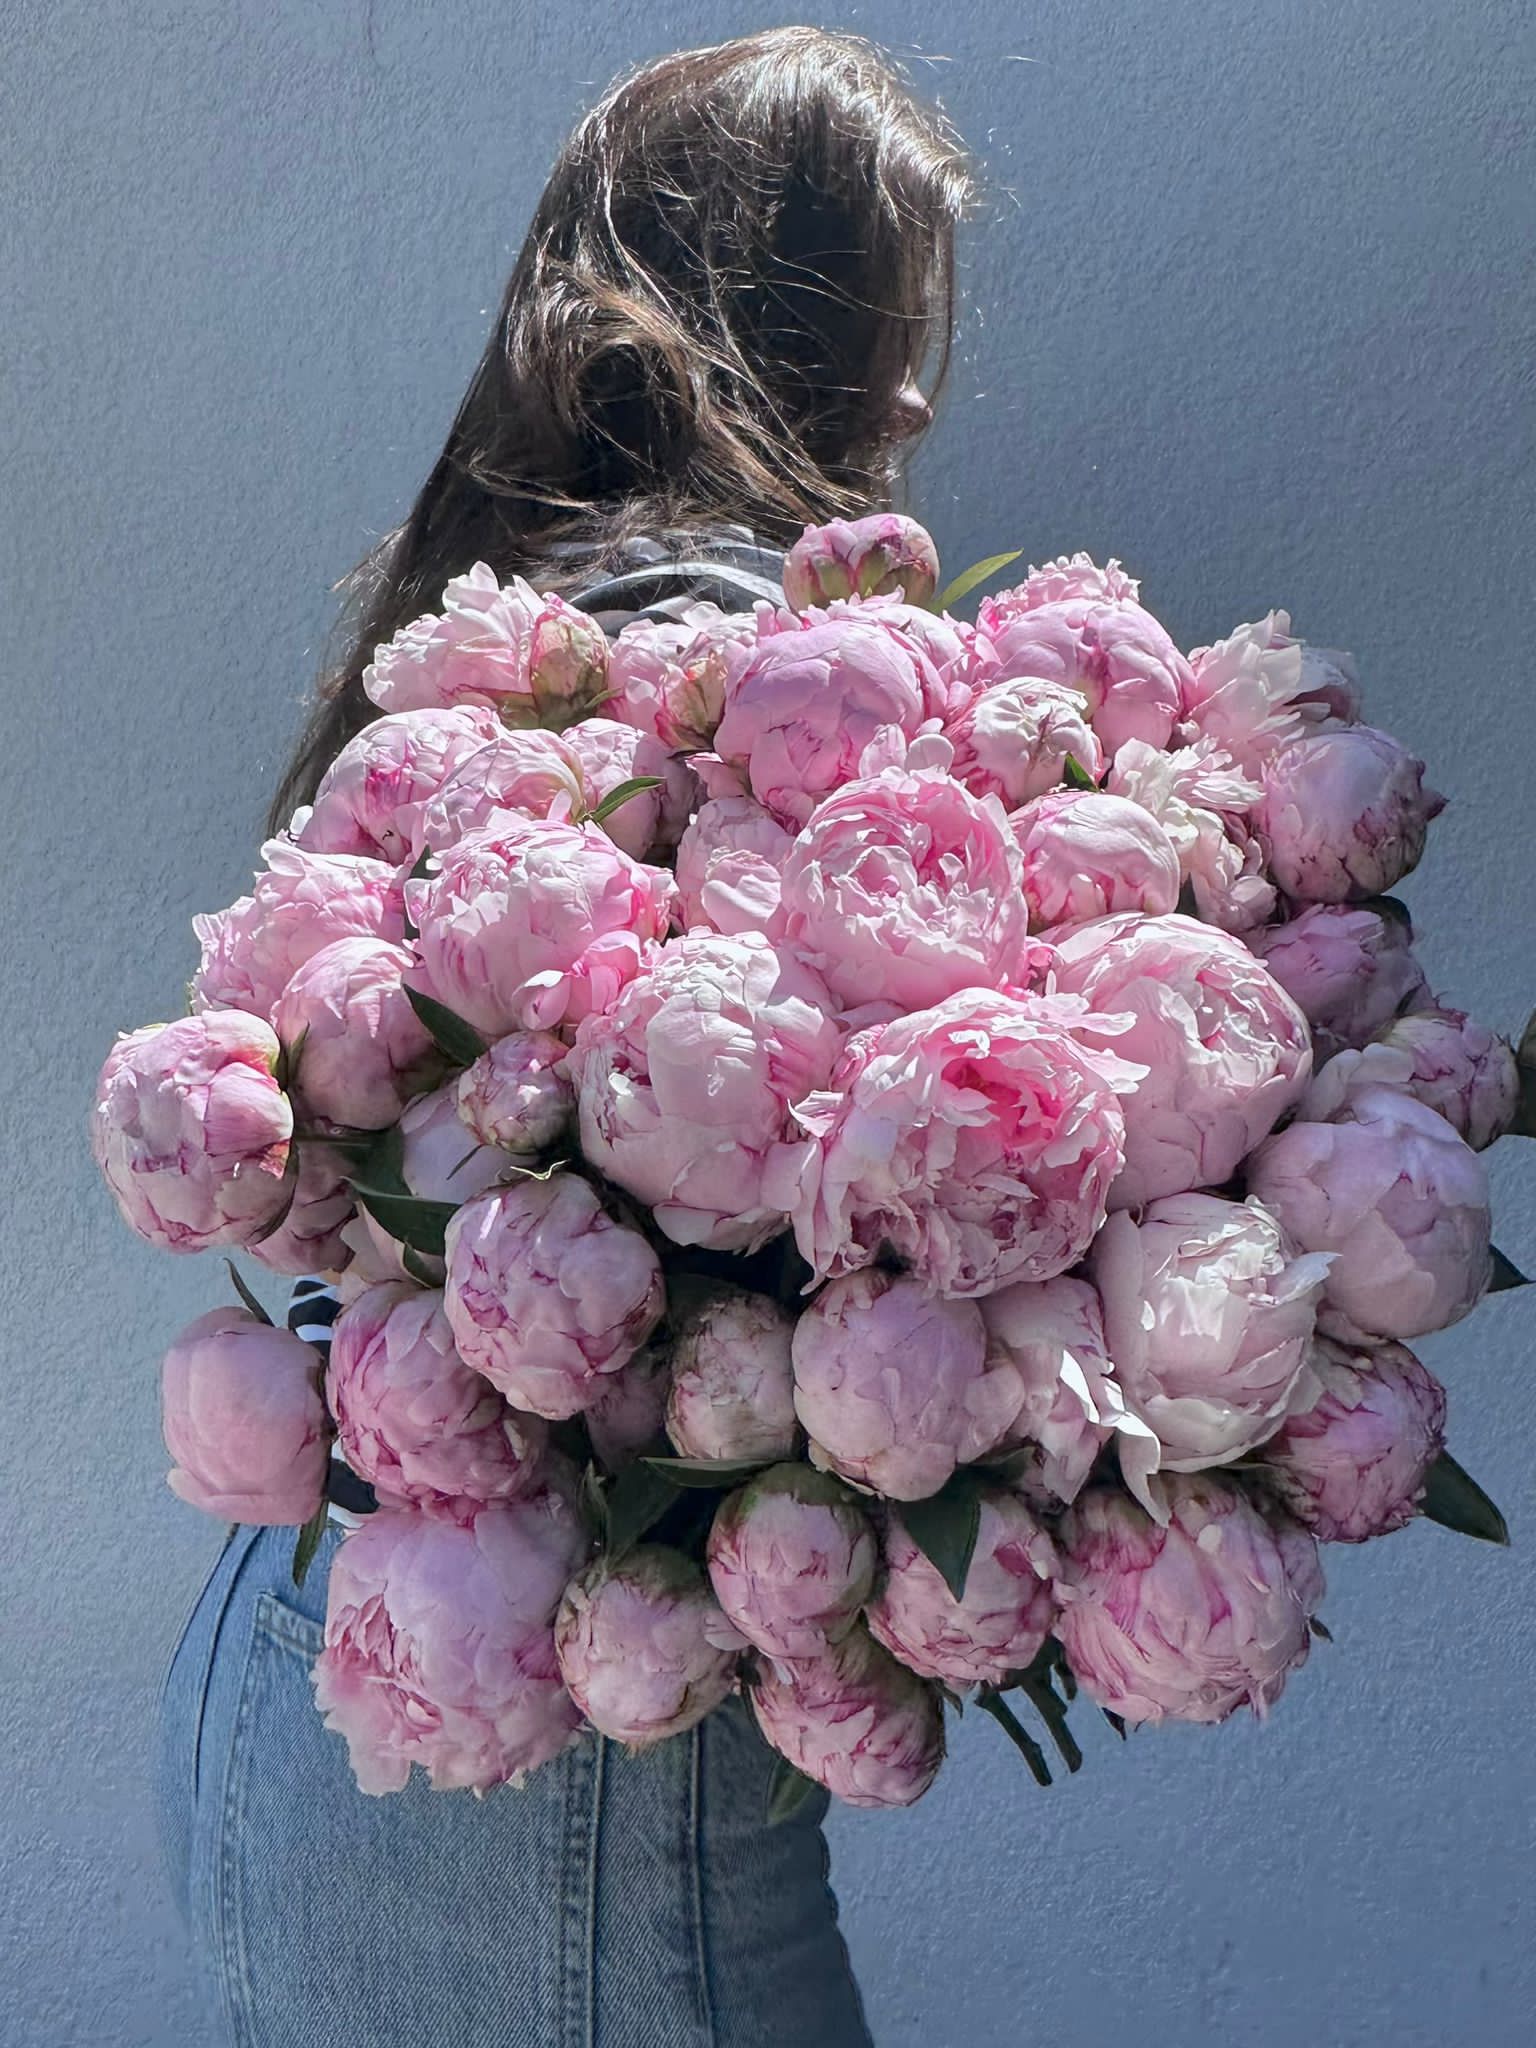 Fresh Red Roses, Peonies for dessert - The most beloved flower by all -peonies